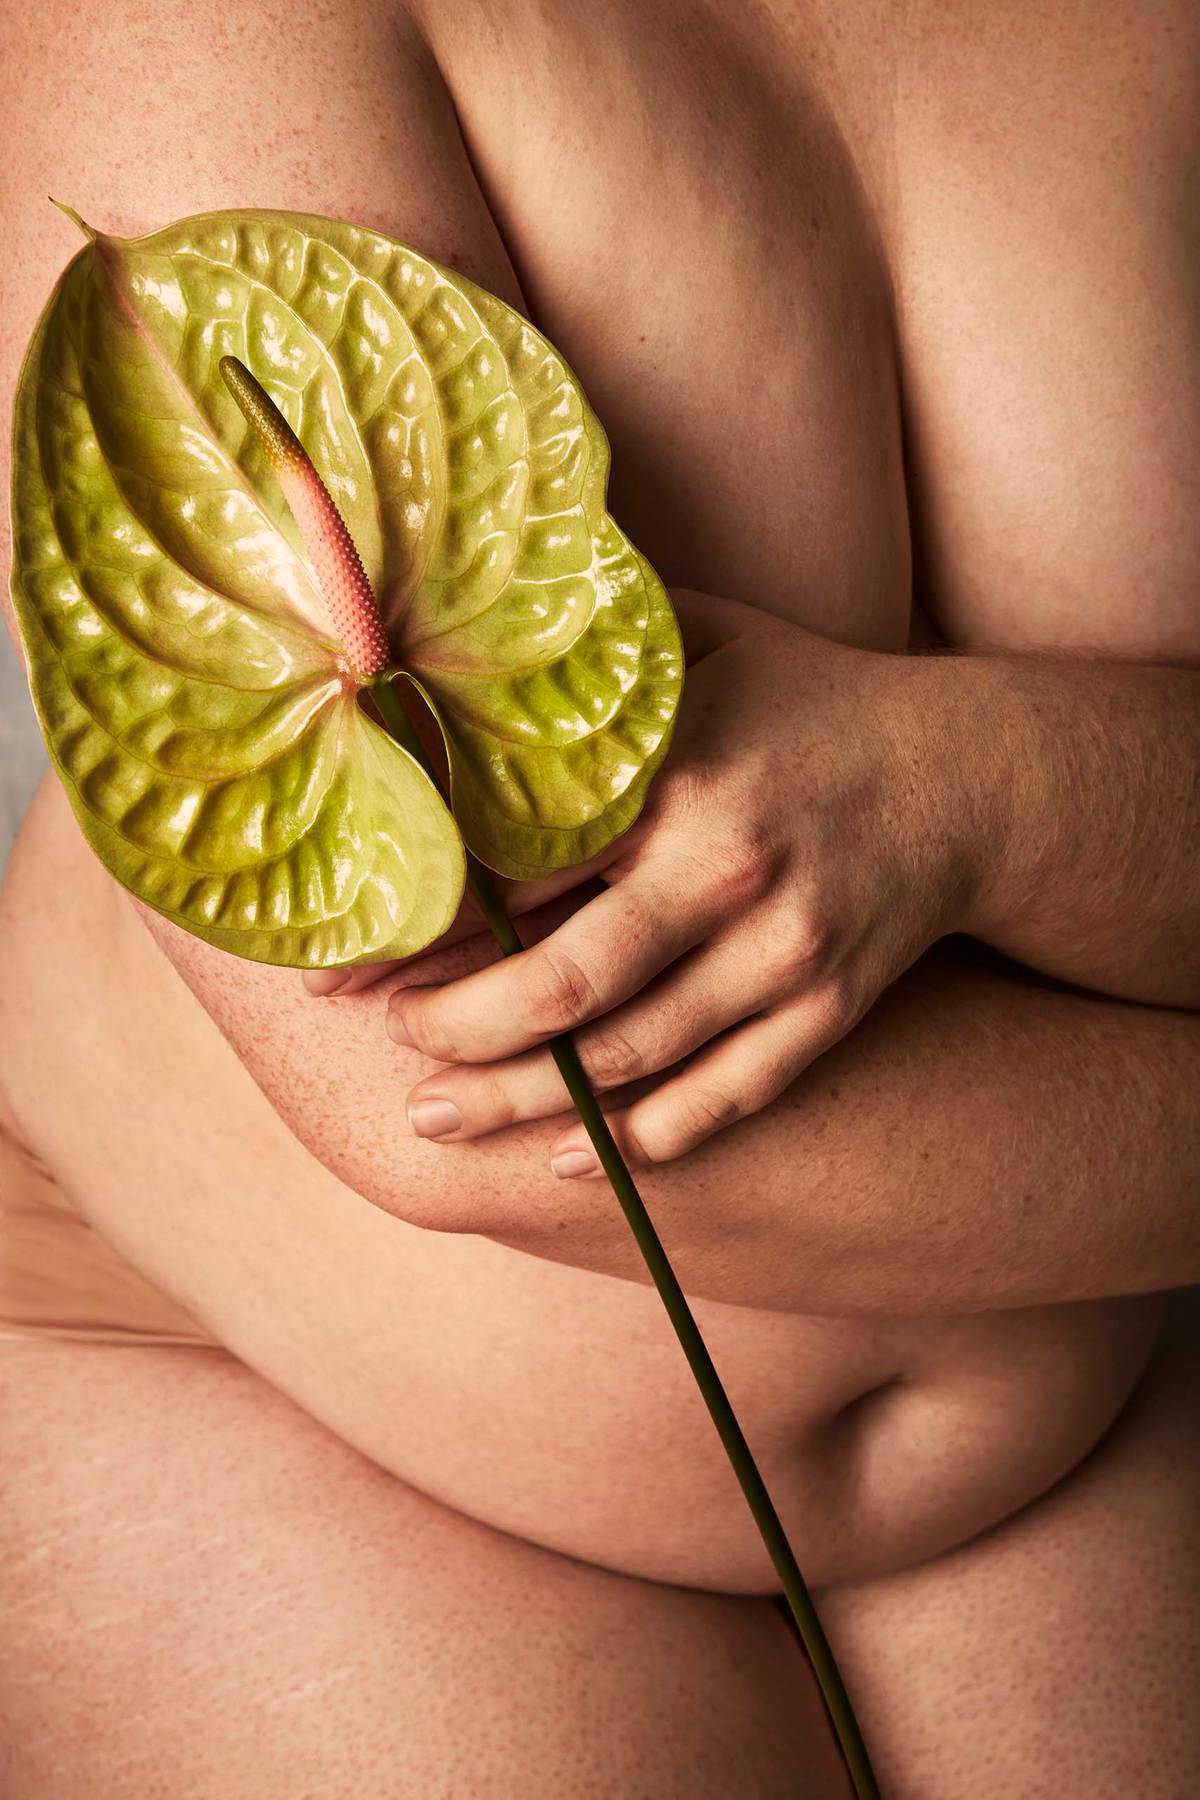 fat_body_shaming_voluptious_female_belly_arms_legs_art_floral_sensual_woman_large_overwheight_CELLULITEBIG_BELLY__dorit_thies_photographyLB_DoritThies_0650_3 copy.jpg